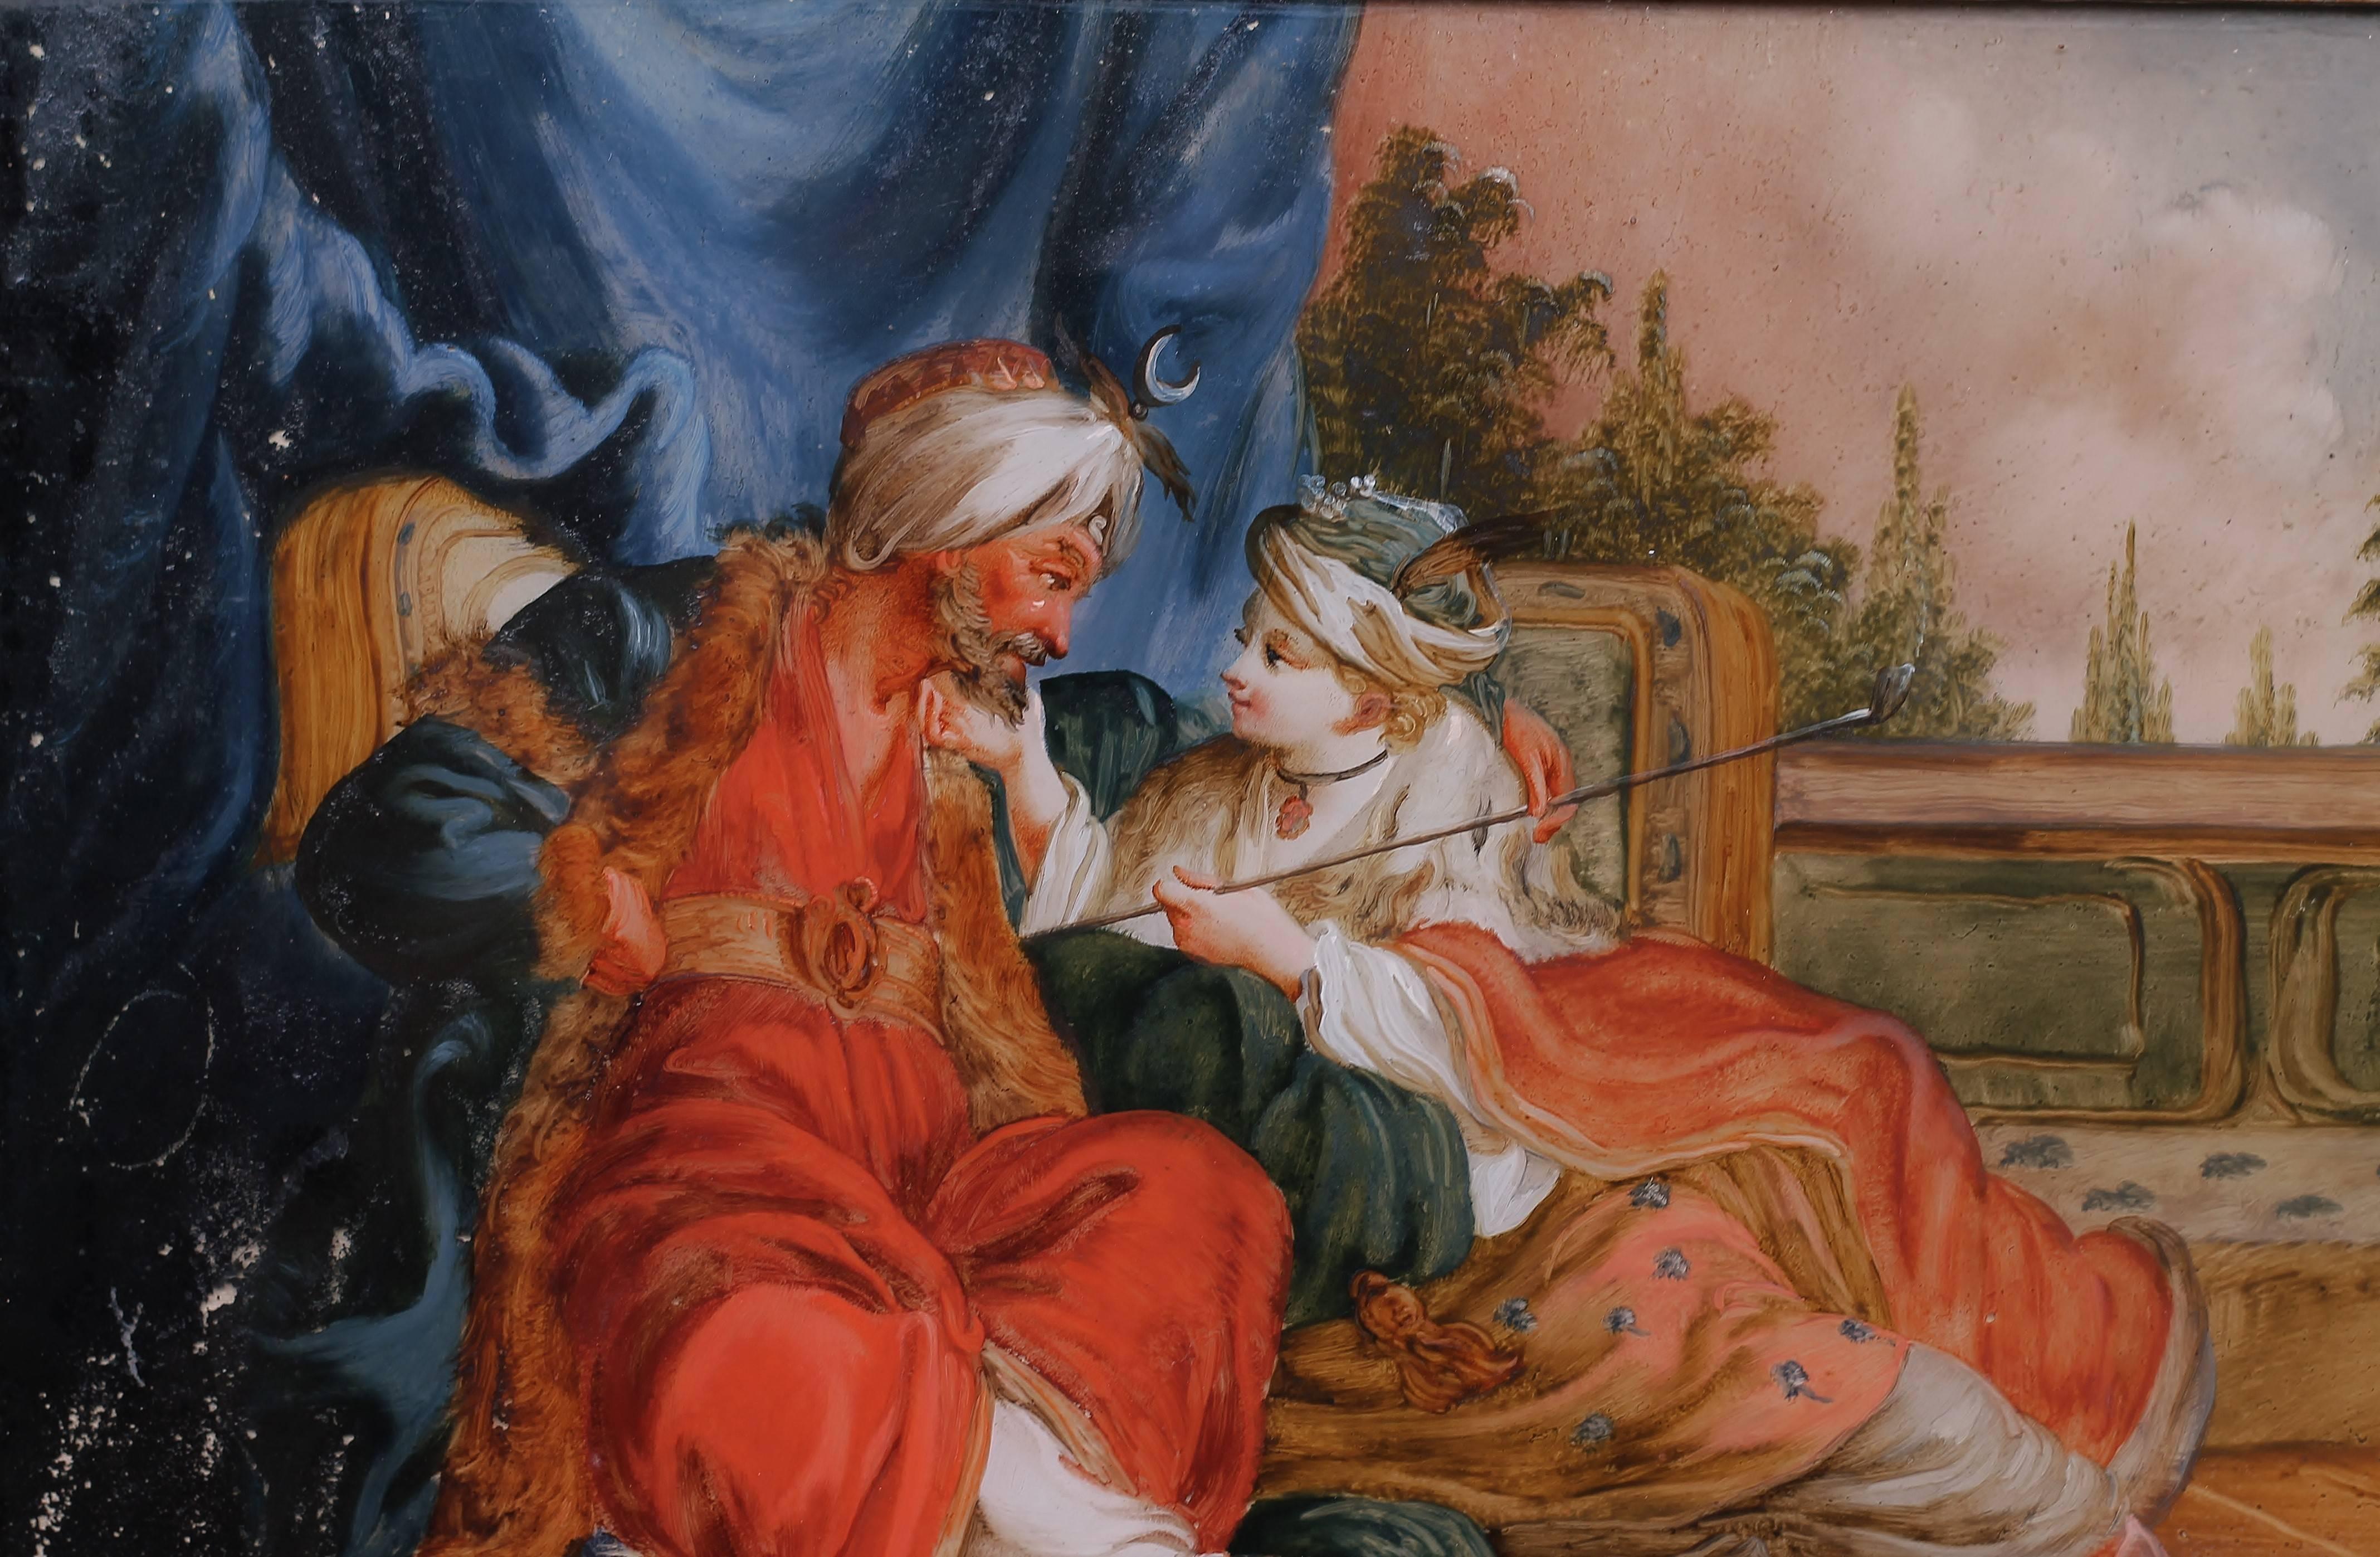 Painting over glass representing « La favorite du Sultan » near François Boucher.
Middle of 18th century.
Dimension H. 23 x W. 30,3 cm without frame. 
D. 2 cm ; W. 35 cm ; H. 27.7 cm with the frame.
Frame in black wood of 18th century.
Visible